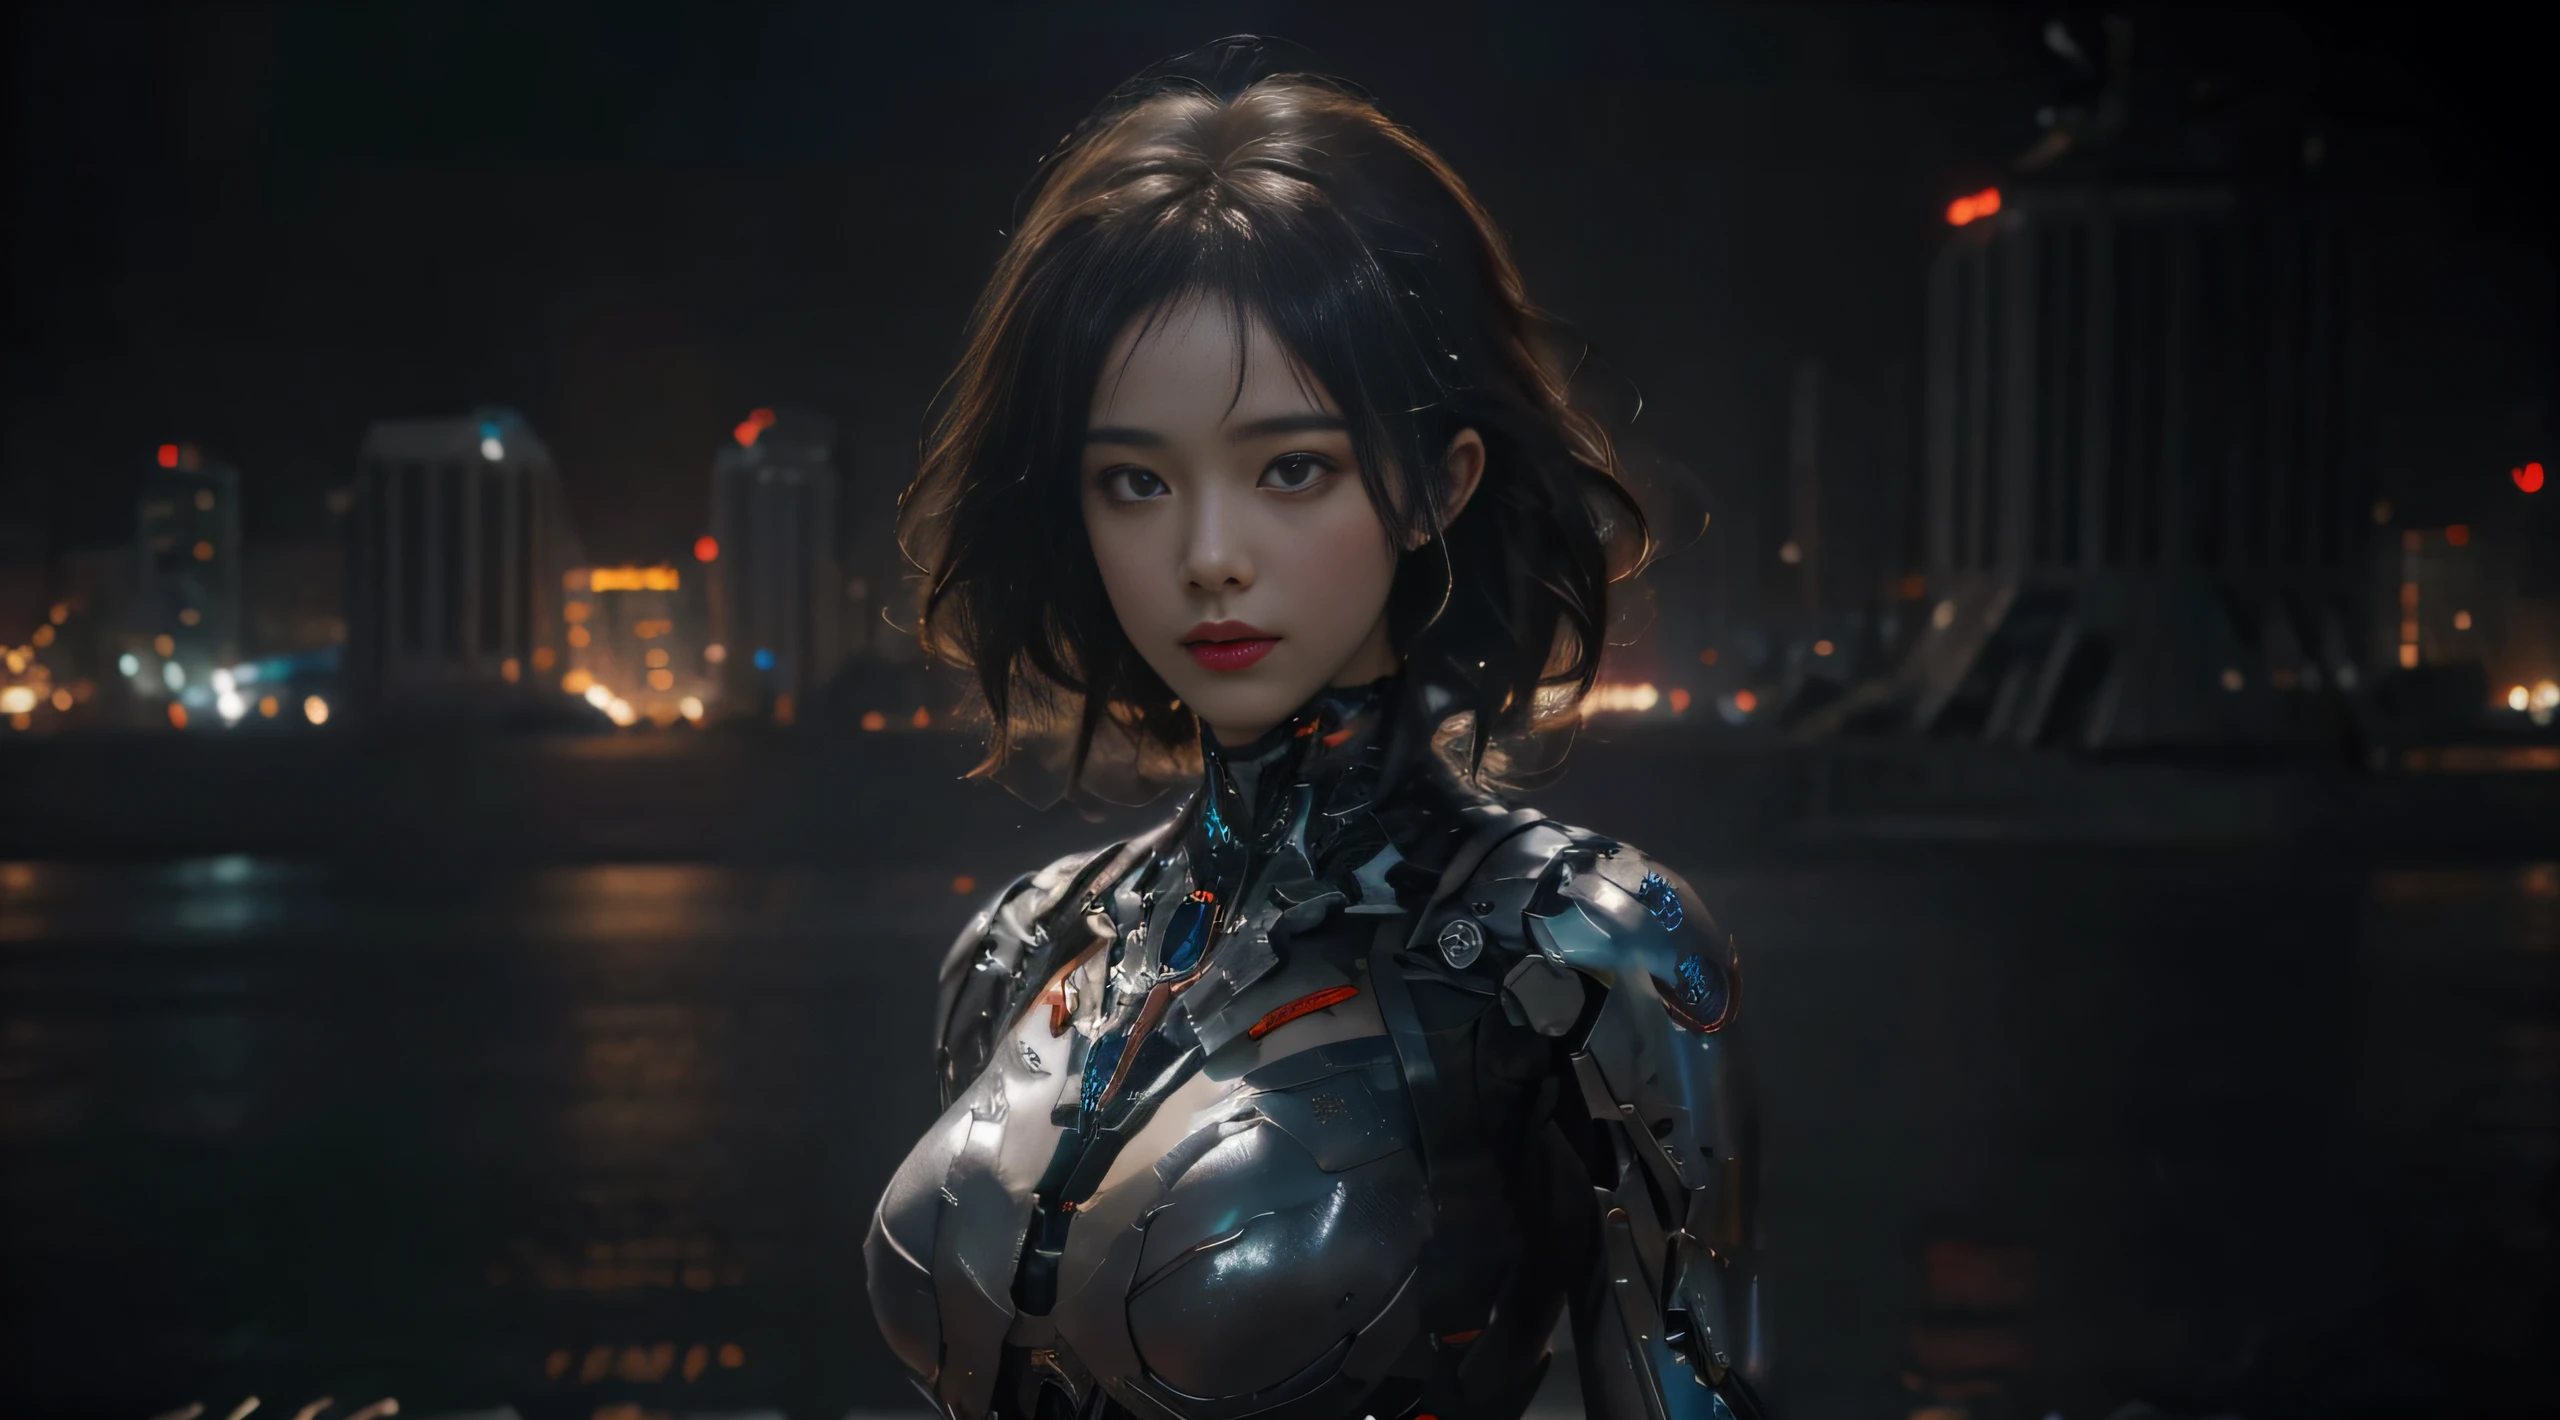 big breast beauty，(length hair:1.4)，Mechanical body，City background at night，tmasterpiece，4K,8K，finedetail，Super-High Resolution，best quailty，Hi-Def，Complicated details，largefilesize，astonishing，depth of fields，naturalshadow，